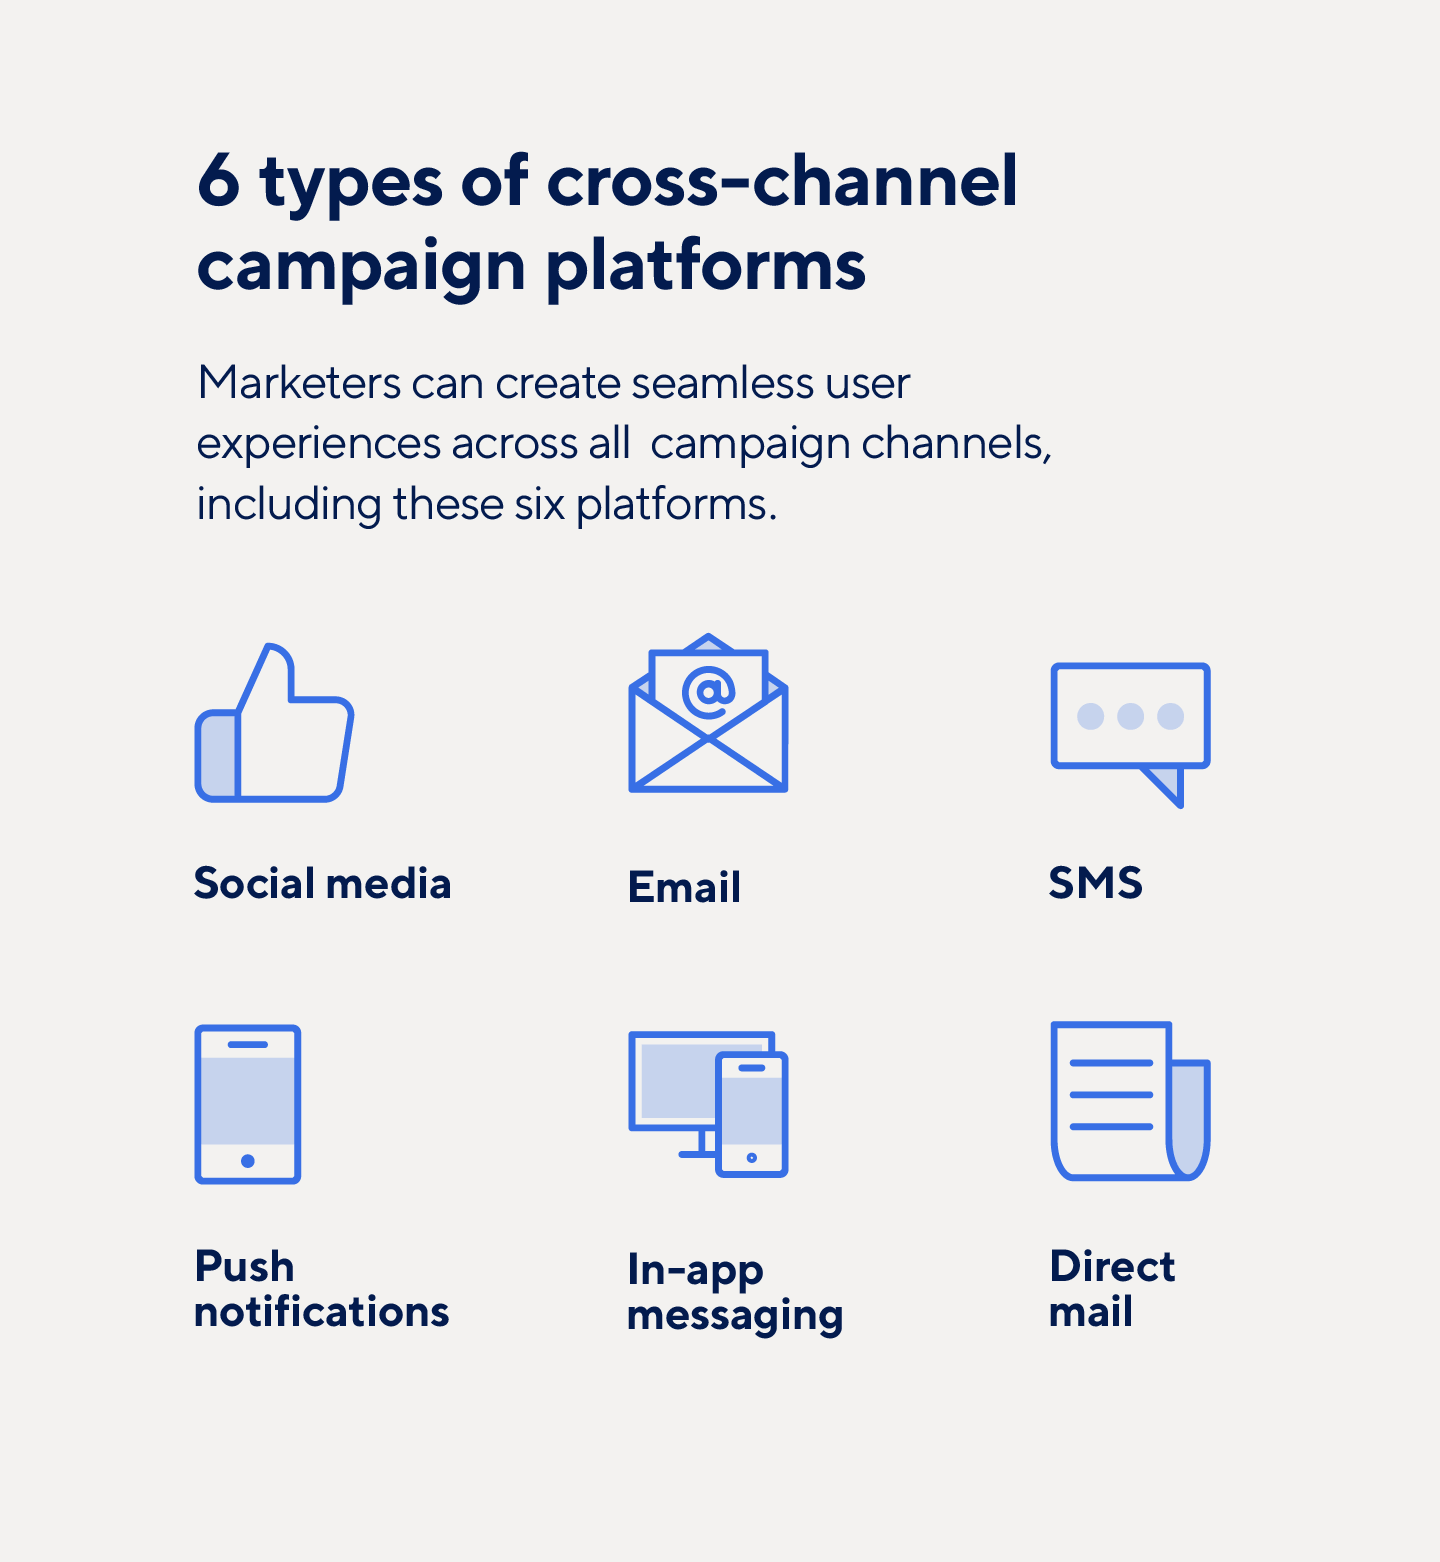 Email and SMS messages are two types of cross-channel campaign platforms.